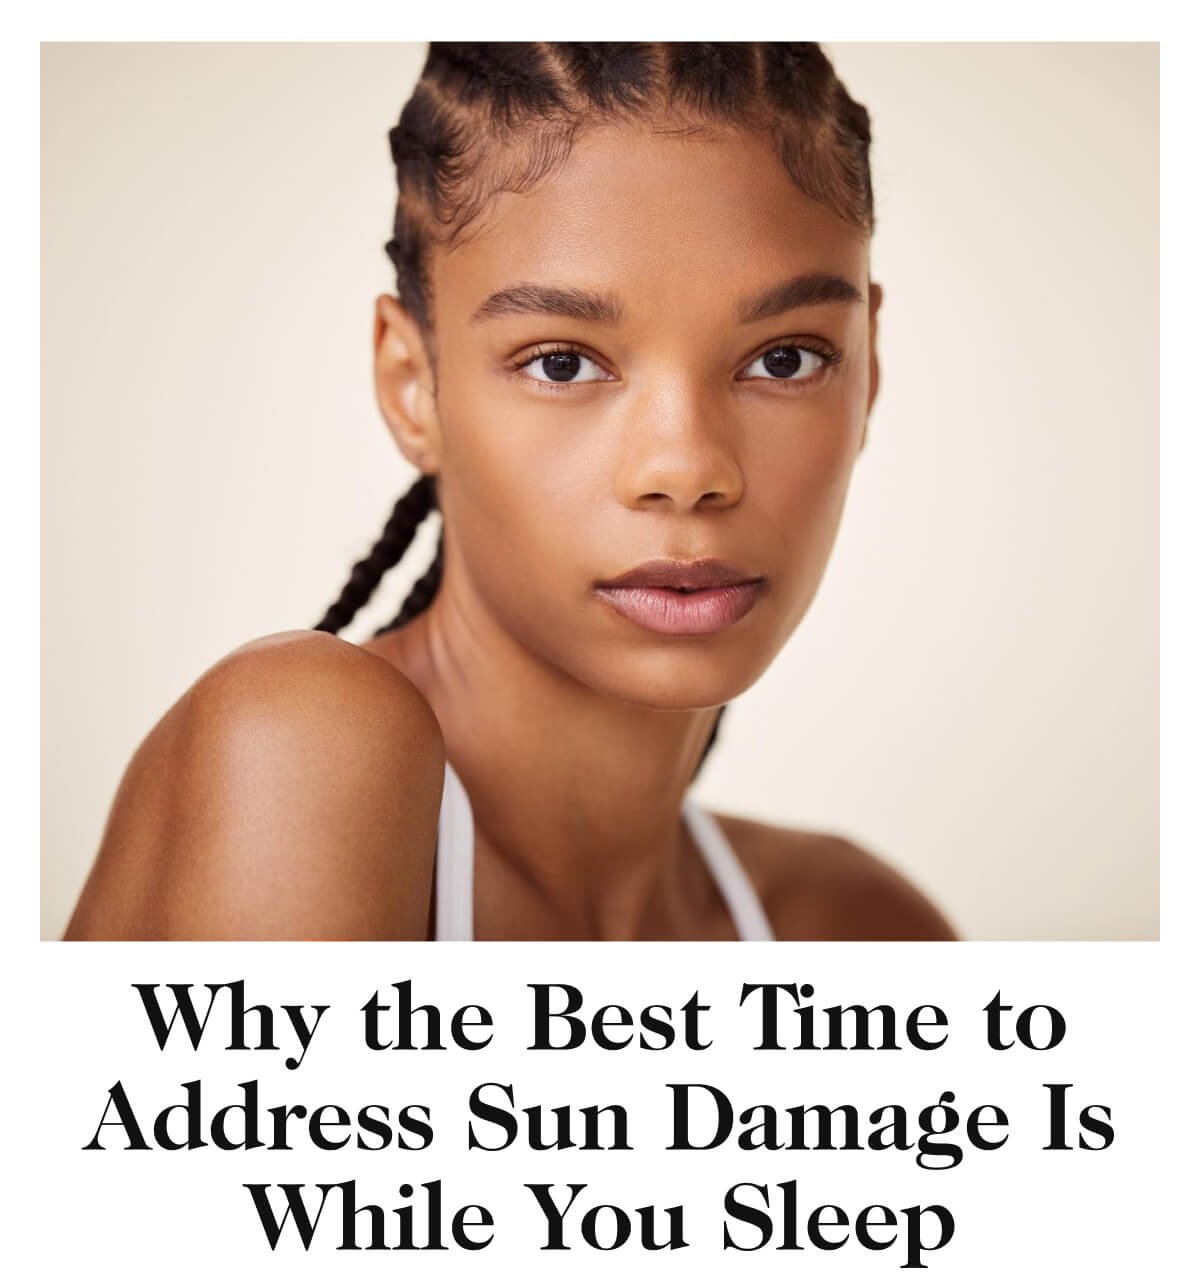 Why the Best Time to Address Sun Damage Is While You Sleep